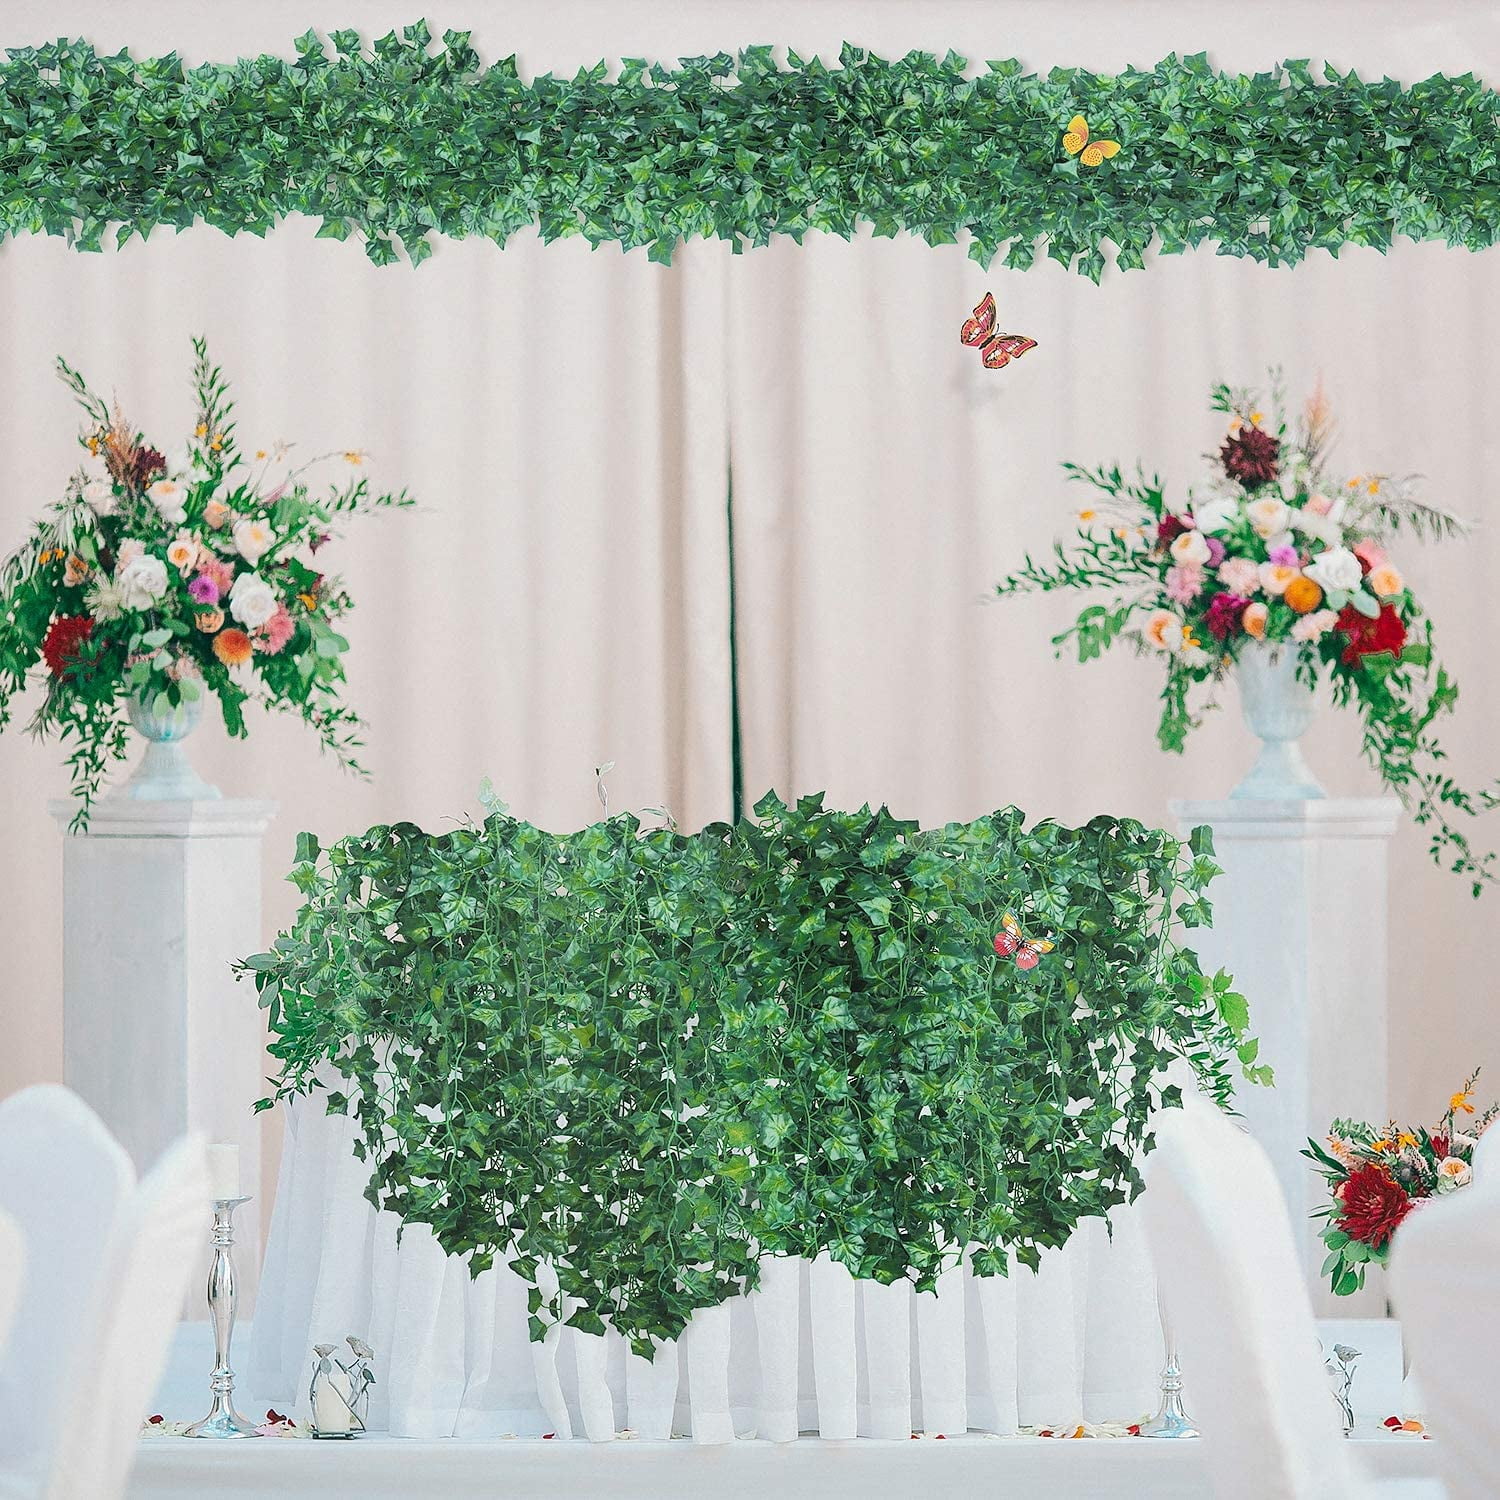  dallisten 3 Strands Begonia Artificial Vines, 67 Silk Vine  Garland with Green Leaves, Fake Hanging Plants Greenery Decor for Home,  Bedroom, Wall, Party, Wedding Decoration : Home & Kitchen